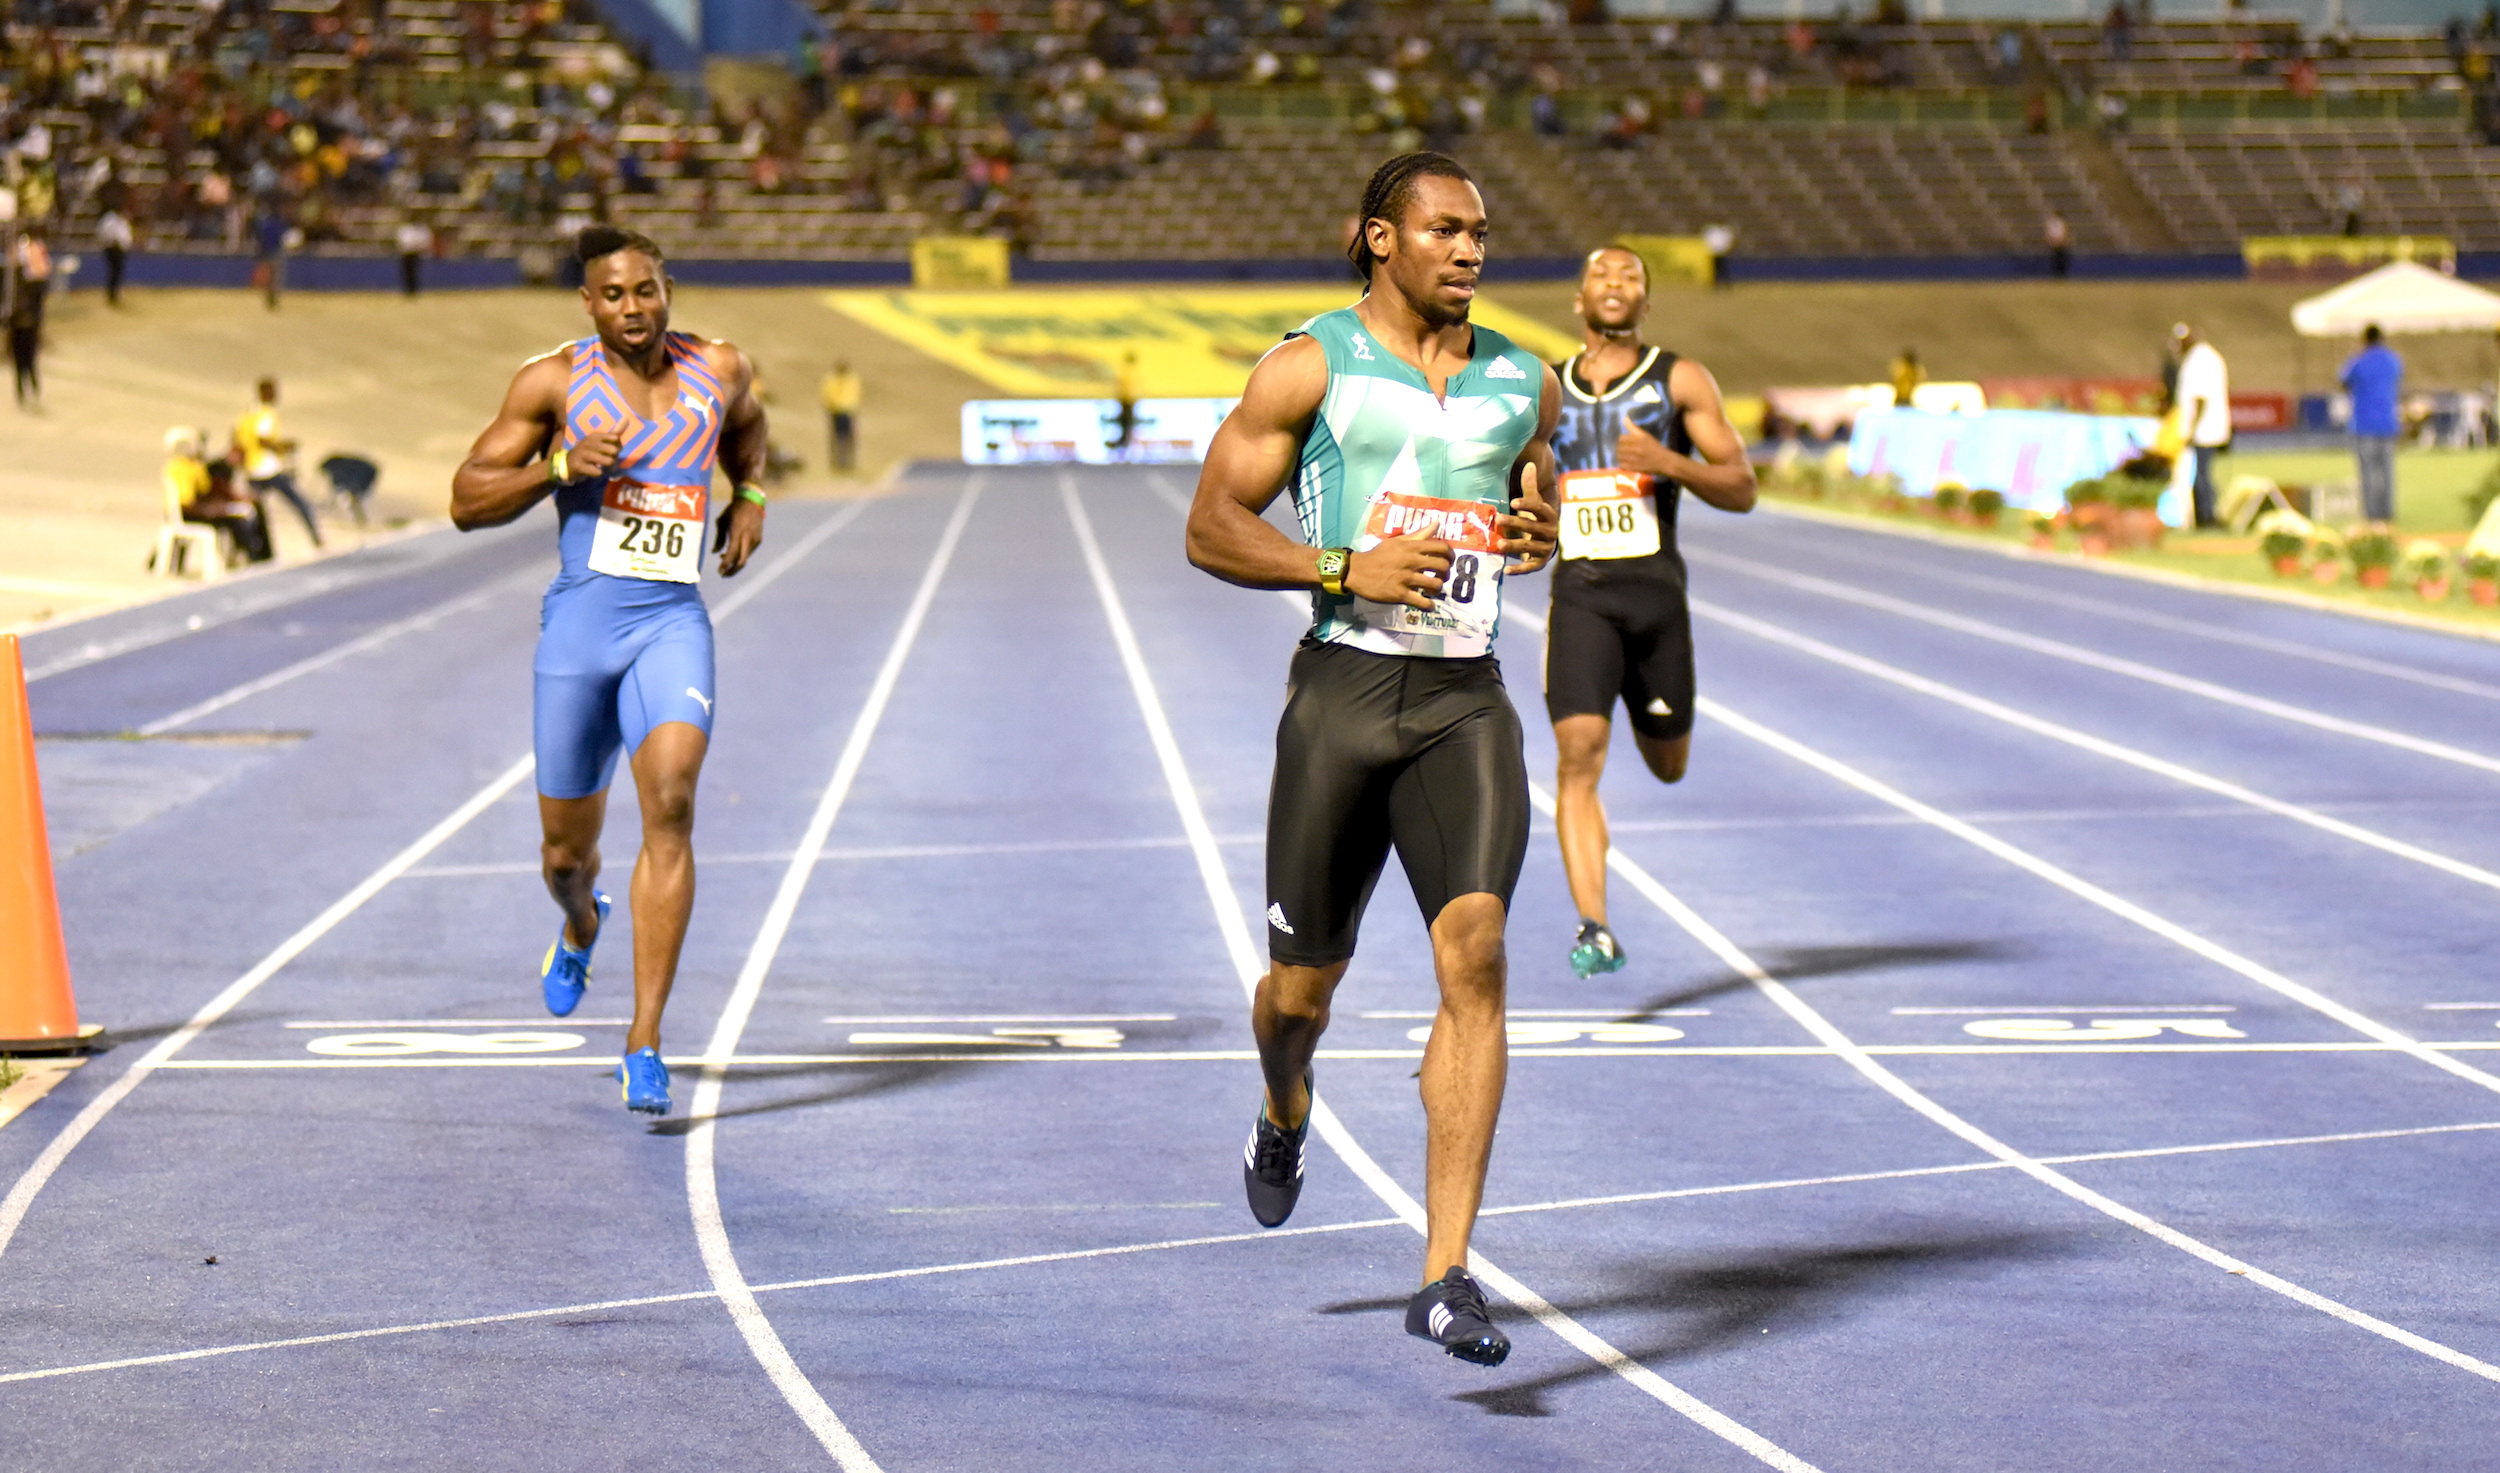 Blake, Thompson on course for sprint double titles